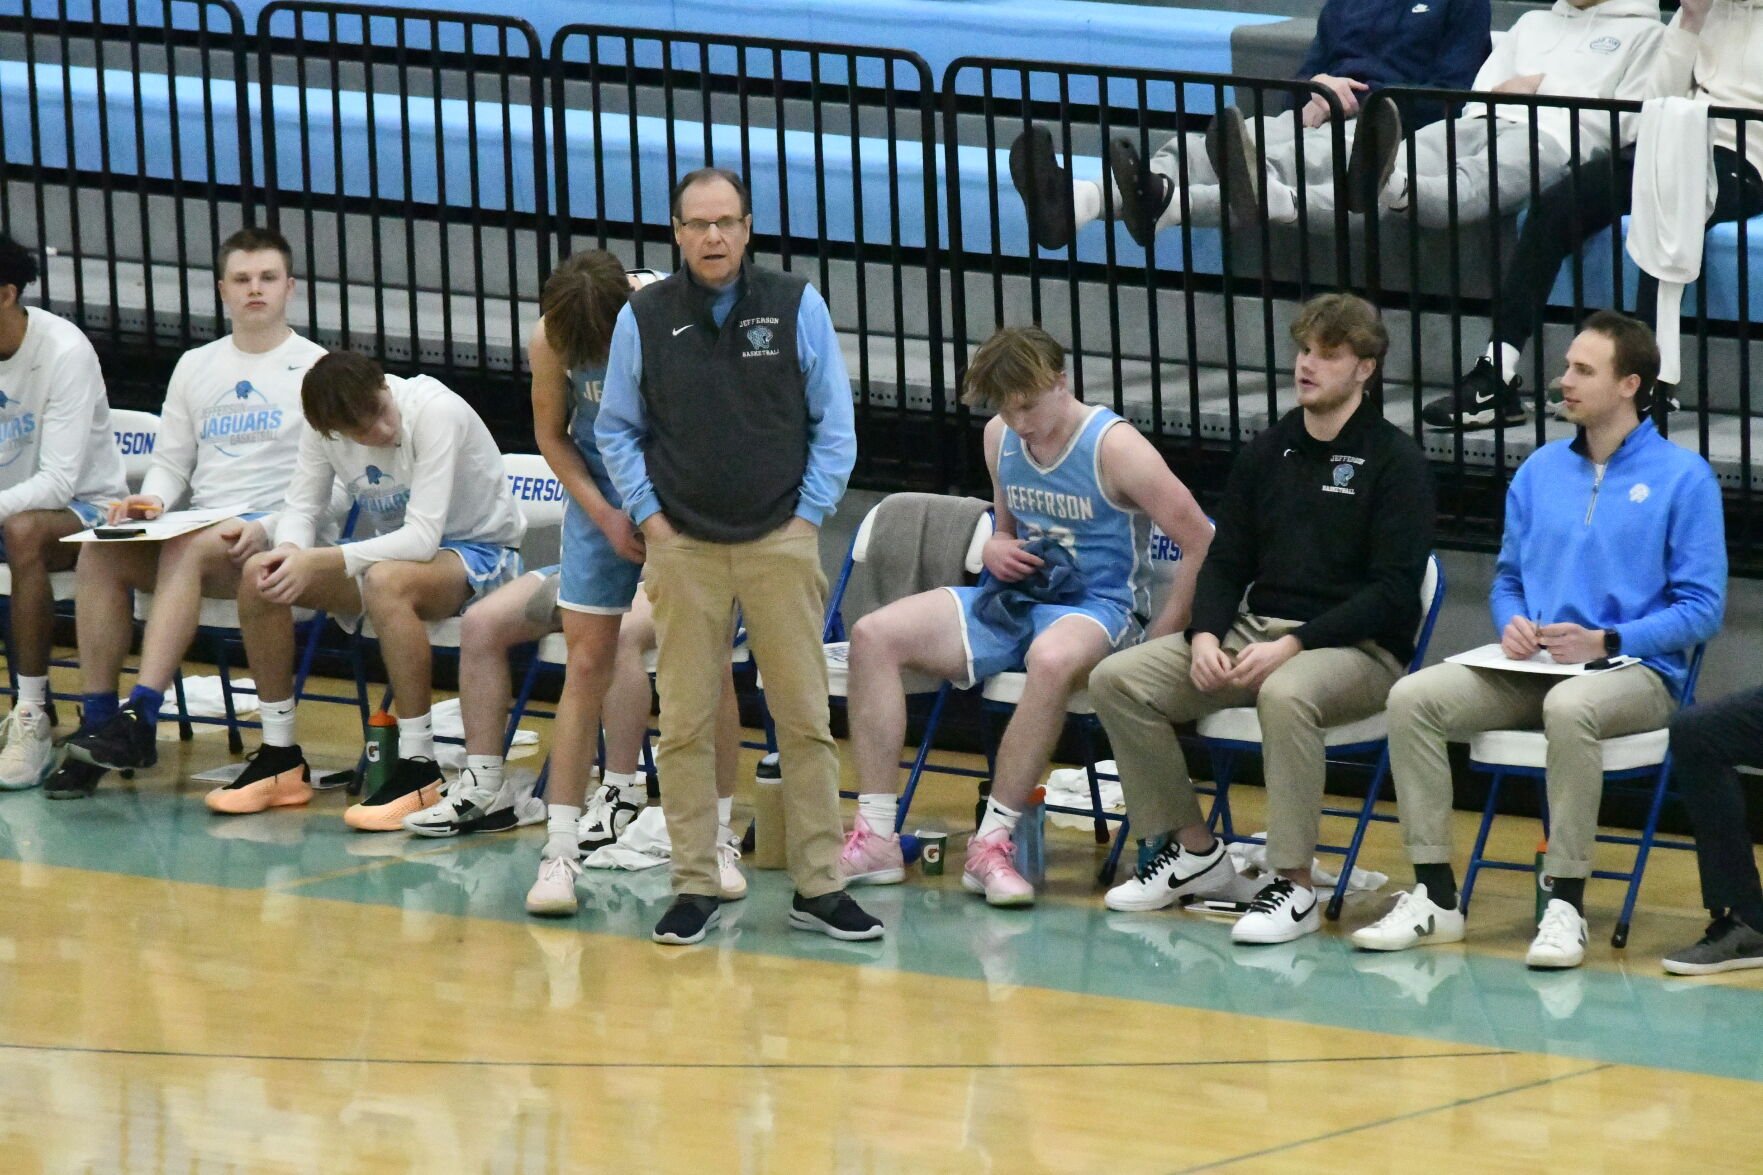 Jefferson Boys’ Basketball Coach Jeff Evens Looks to Turn Things Around After 10 Game Losing Streak